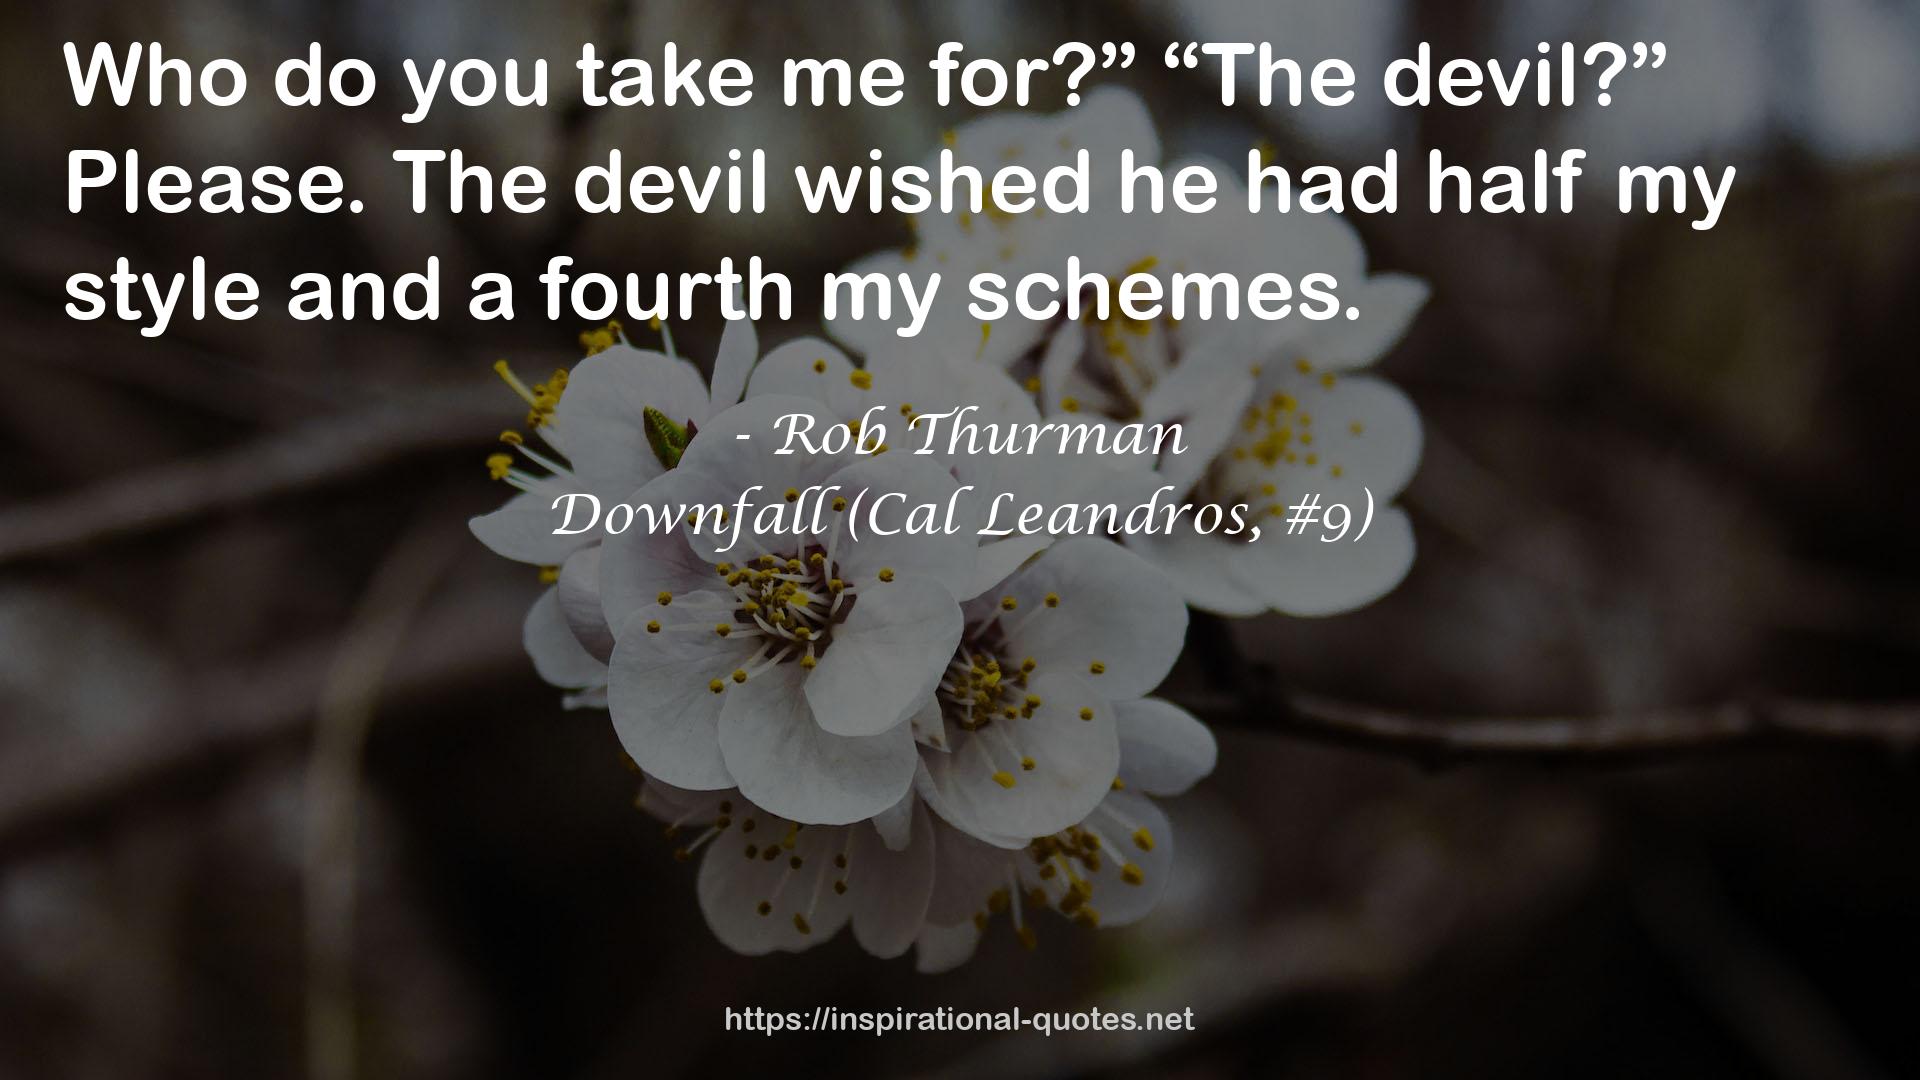 Downfall (Cal Leandros, #9) QUOTES